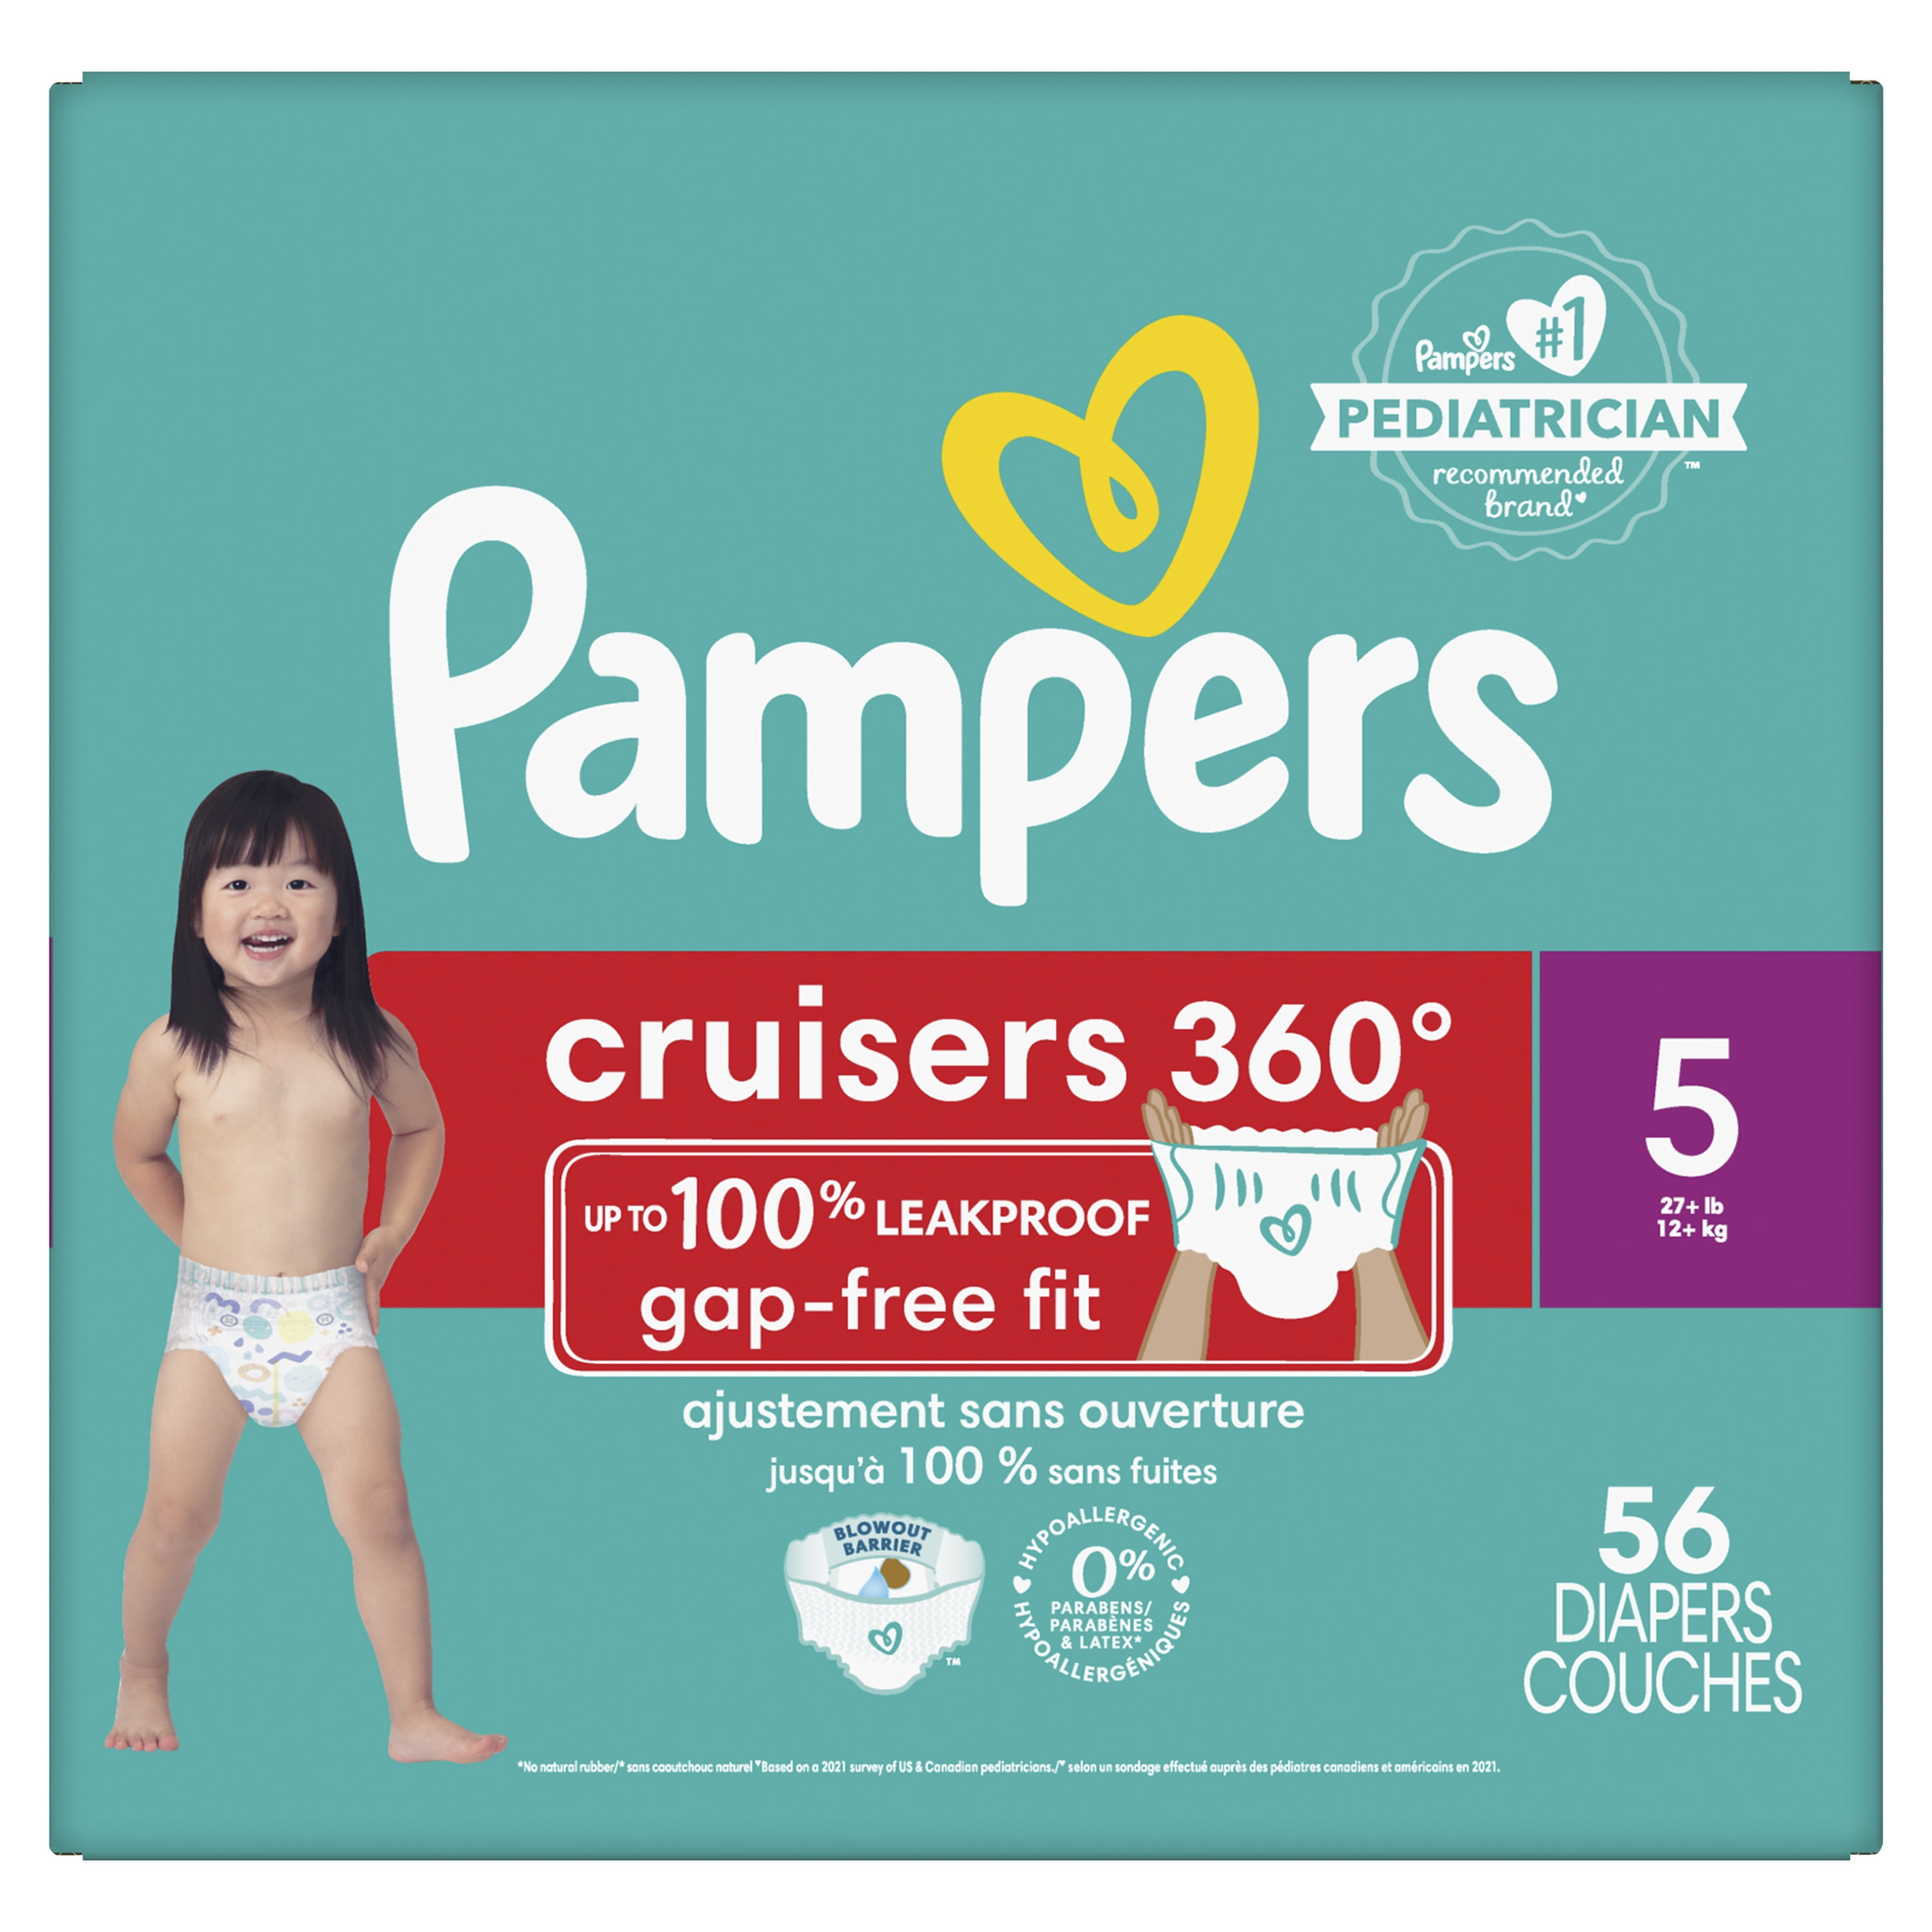 Pampers - Premium Care Pants - Taille 5 - Mega Pack - 80 couches culottes -  12/18KG